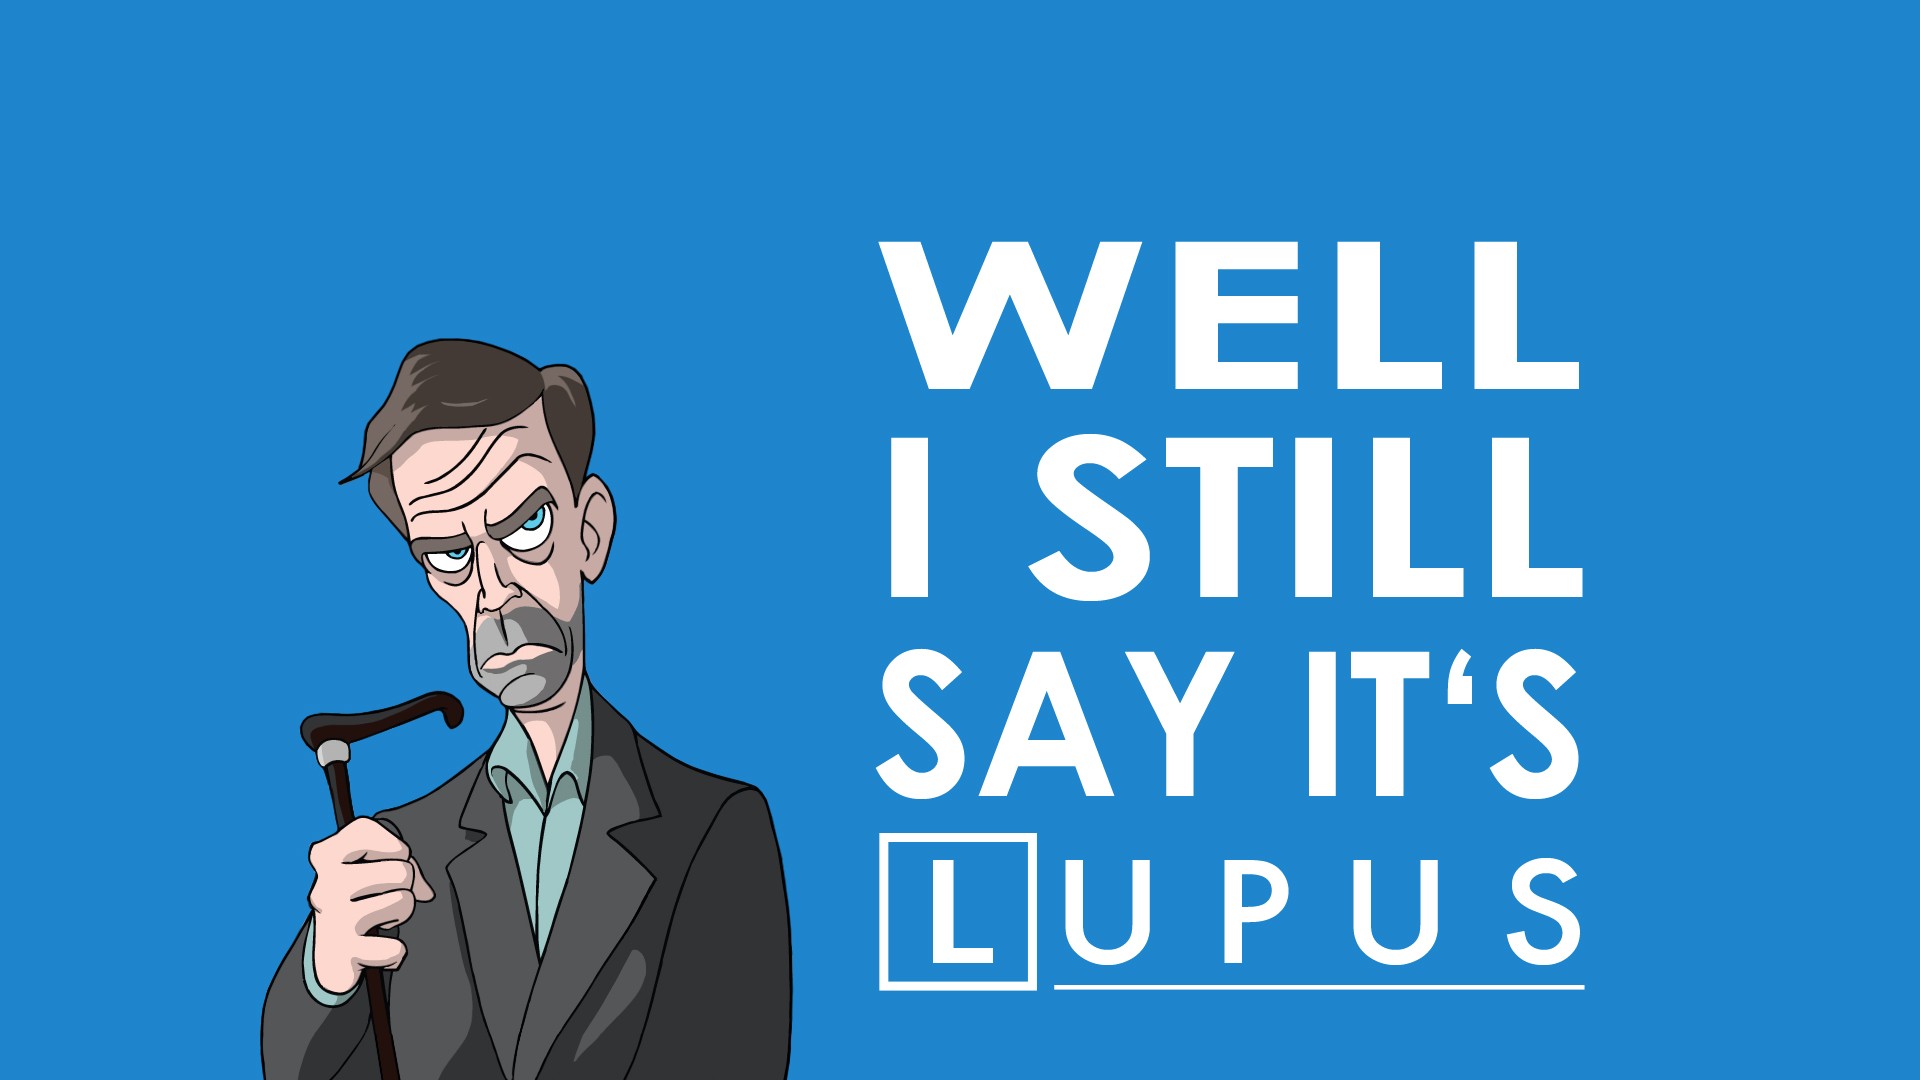 General 1920x1080 Hugh Laurie TV series text artwork simple background blue background